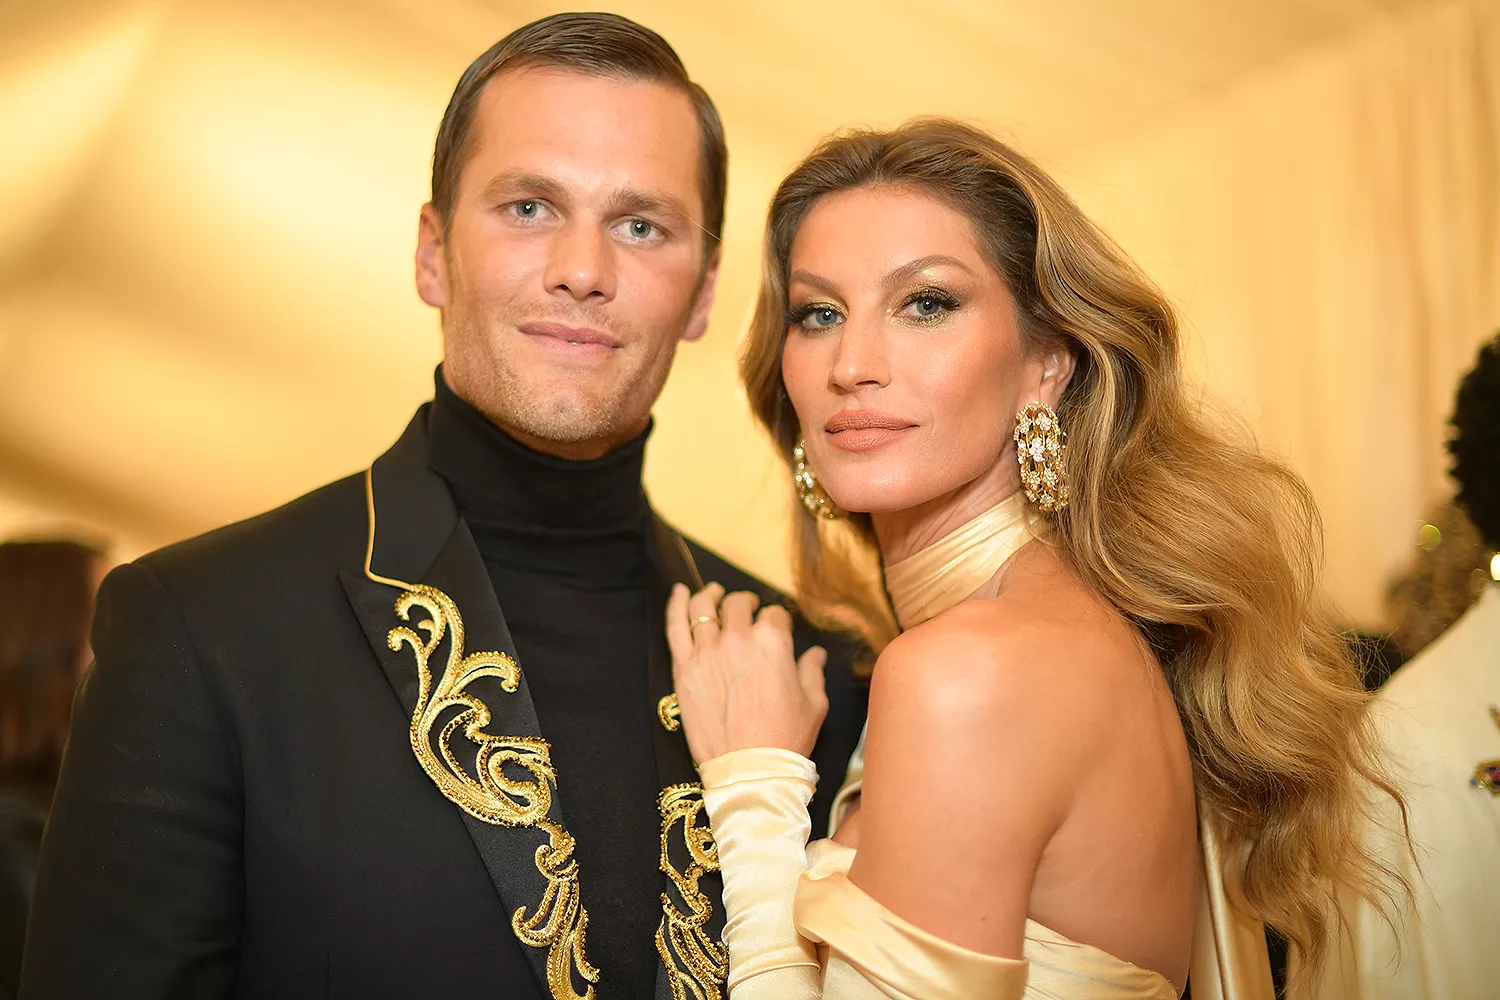 Gisele Bundchen Is Deeply Disappointed And Feels Disrespected By Tom Brady’s Netflix Roast Show